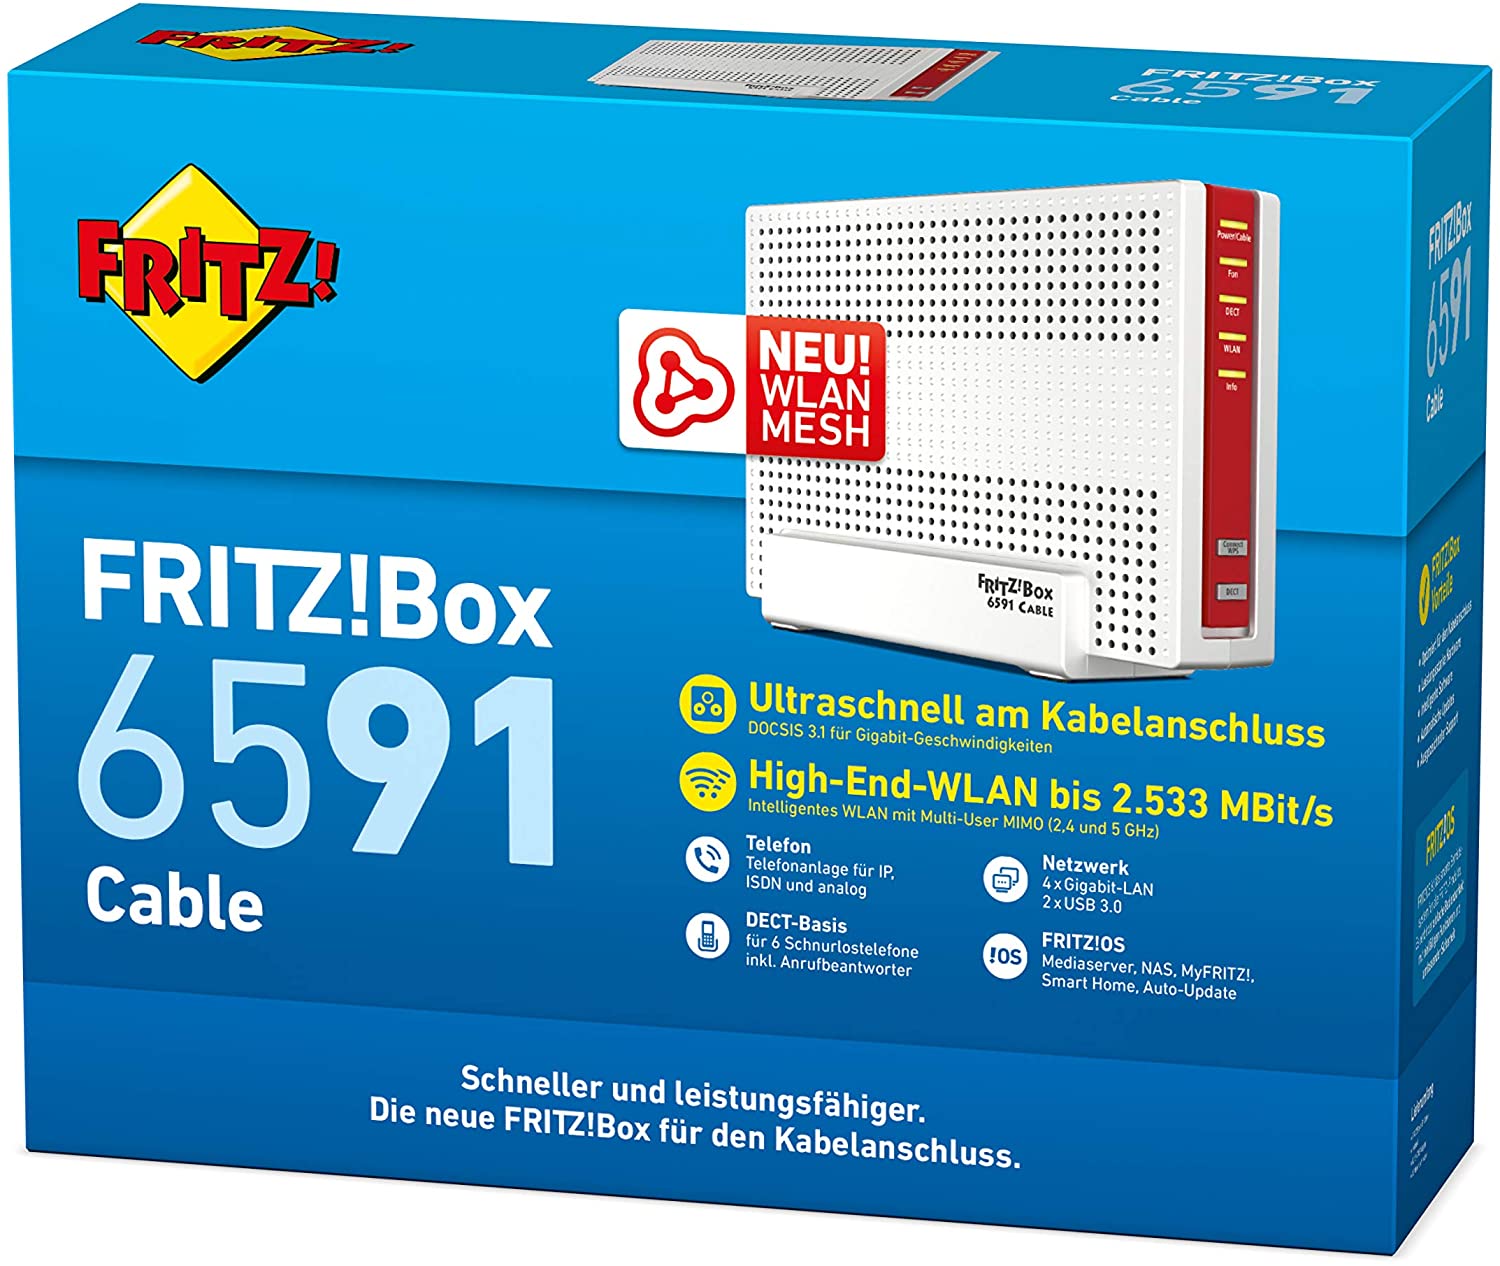 AVM FRITZ!Box 6591 Cable WLAN AC + N Router